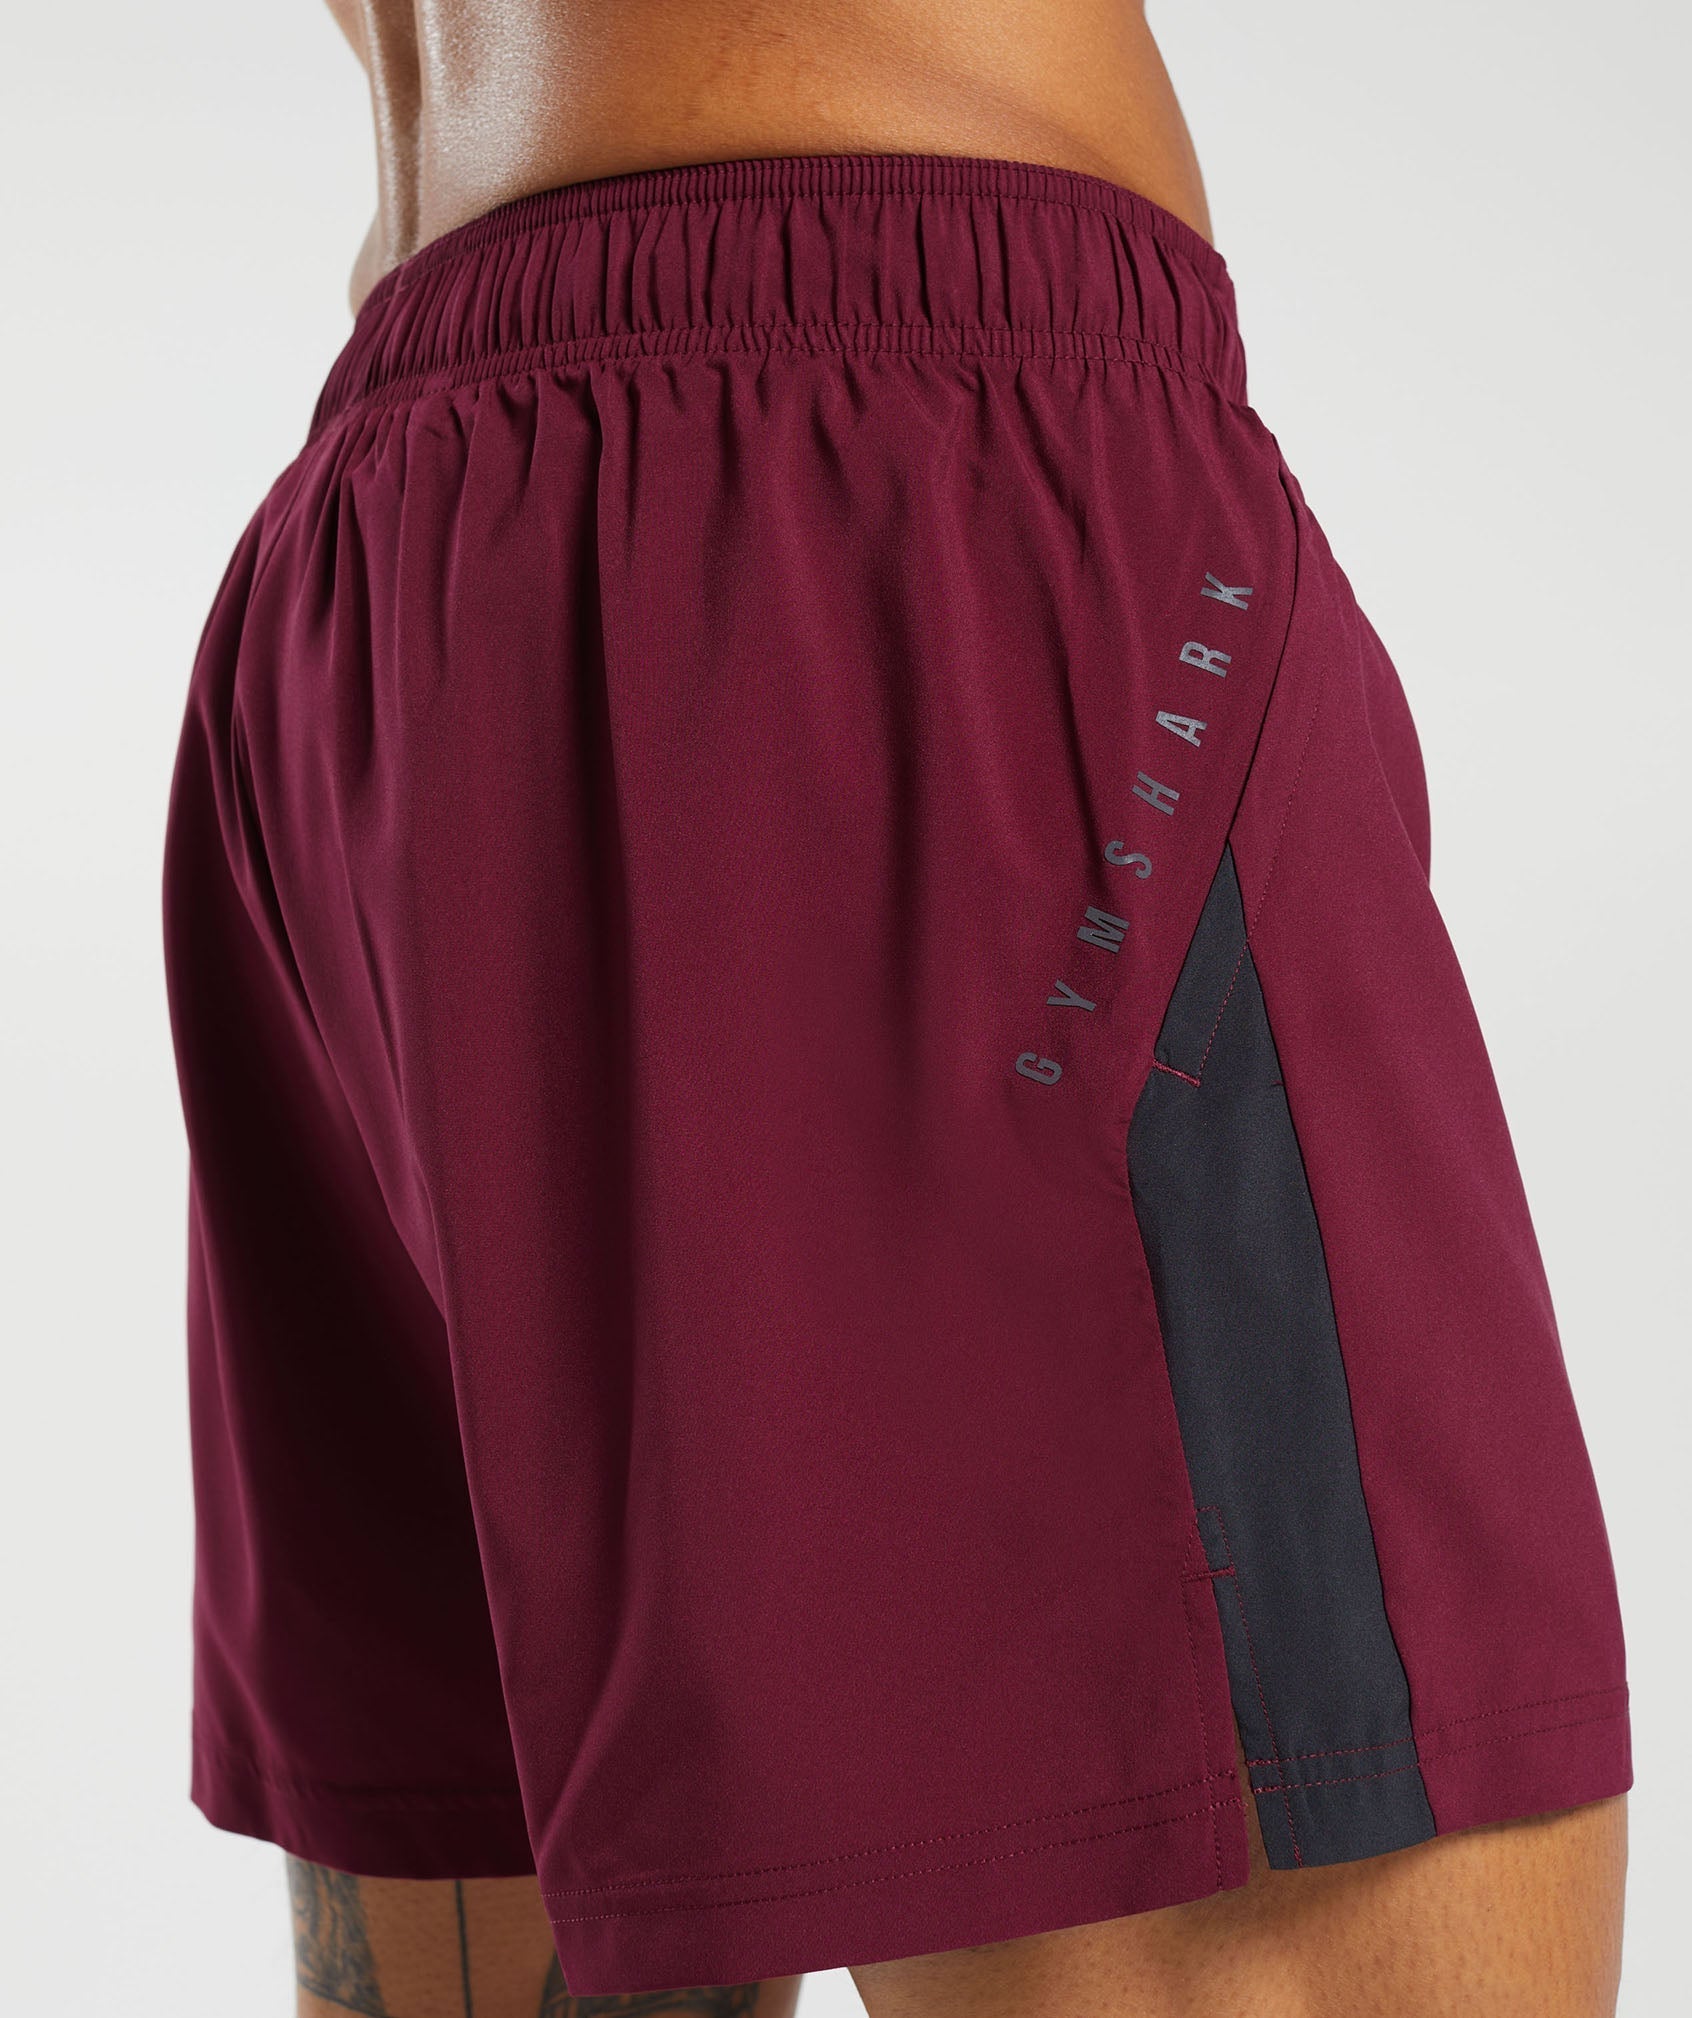 Sport 5" Shorts in Plum Pink/Black - view 5